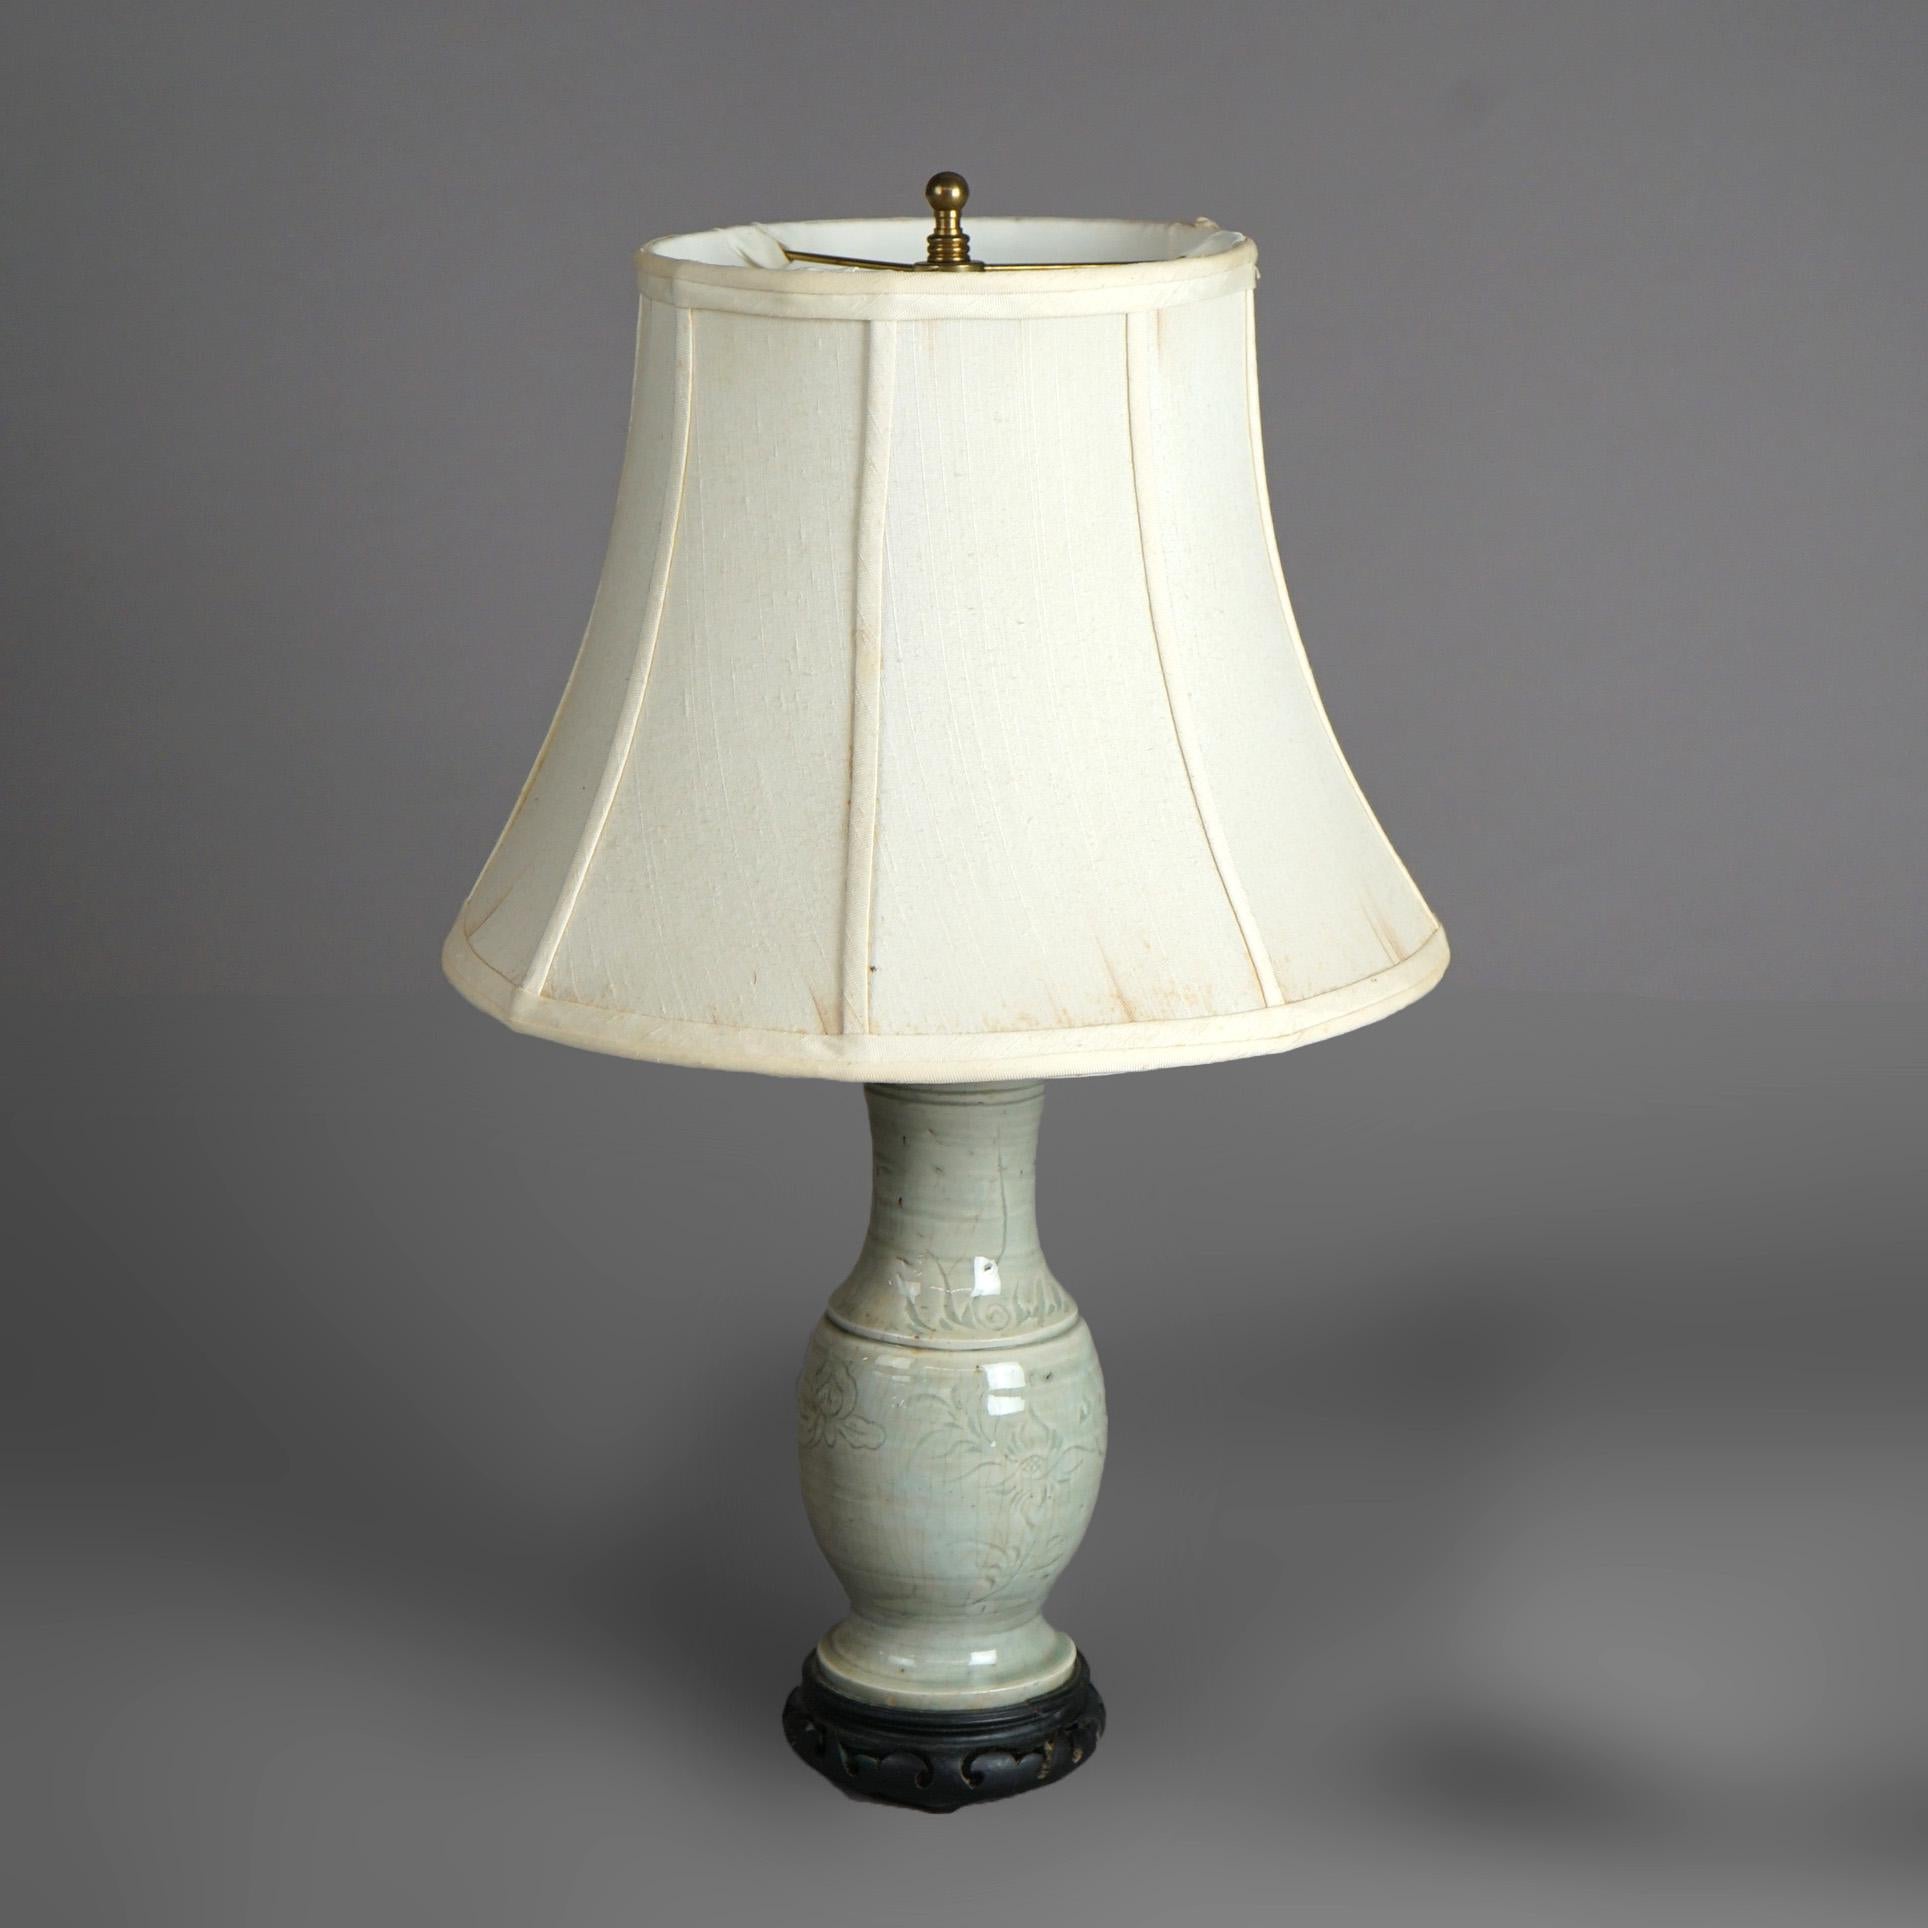 Antique Chinese Celadon Glazed Foliate Incised Art Pottery Table Lamp C1930 2